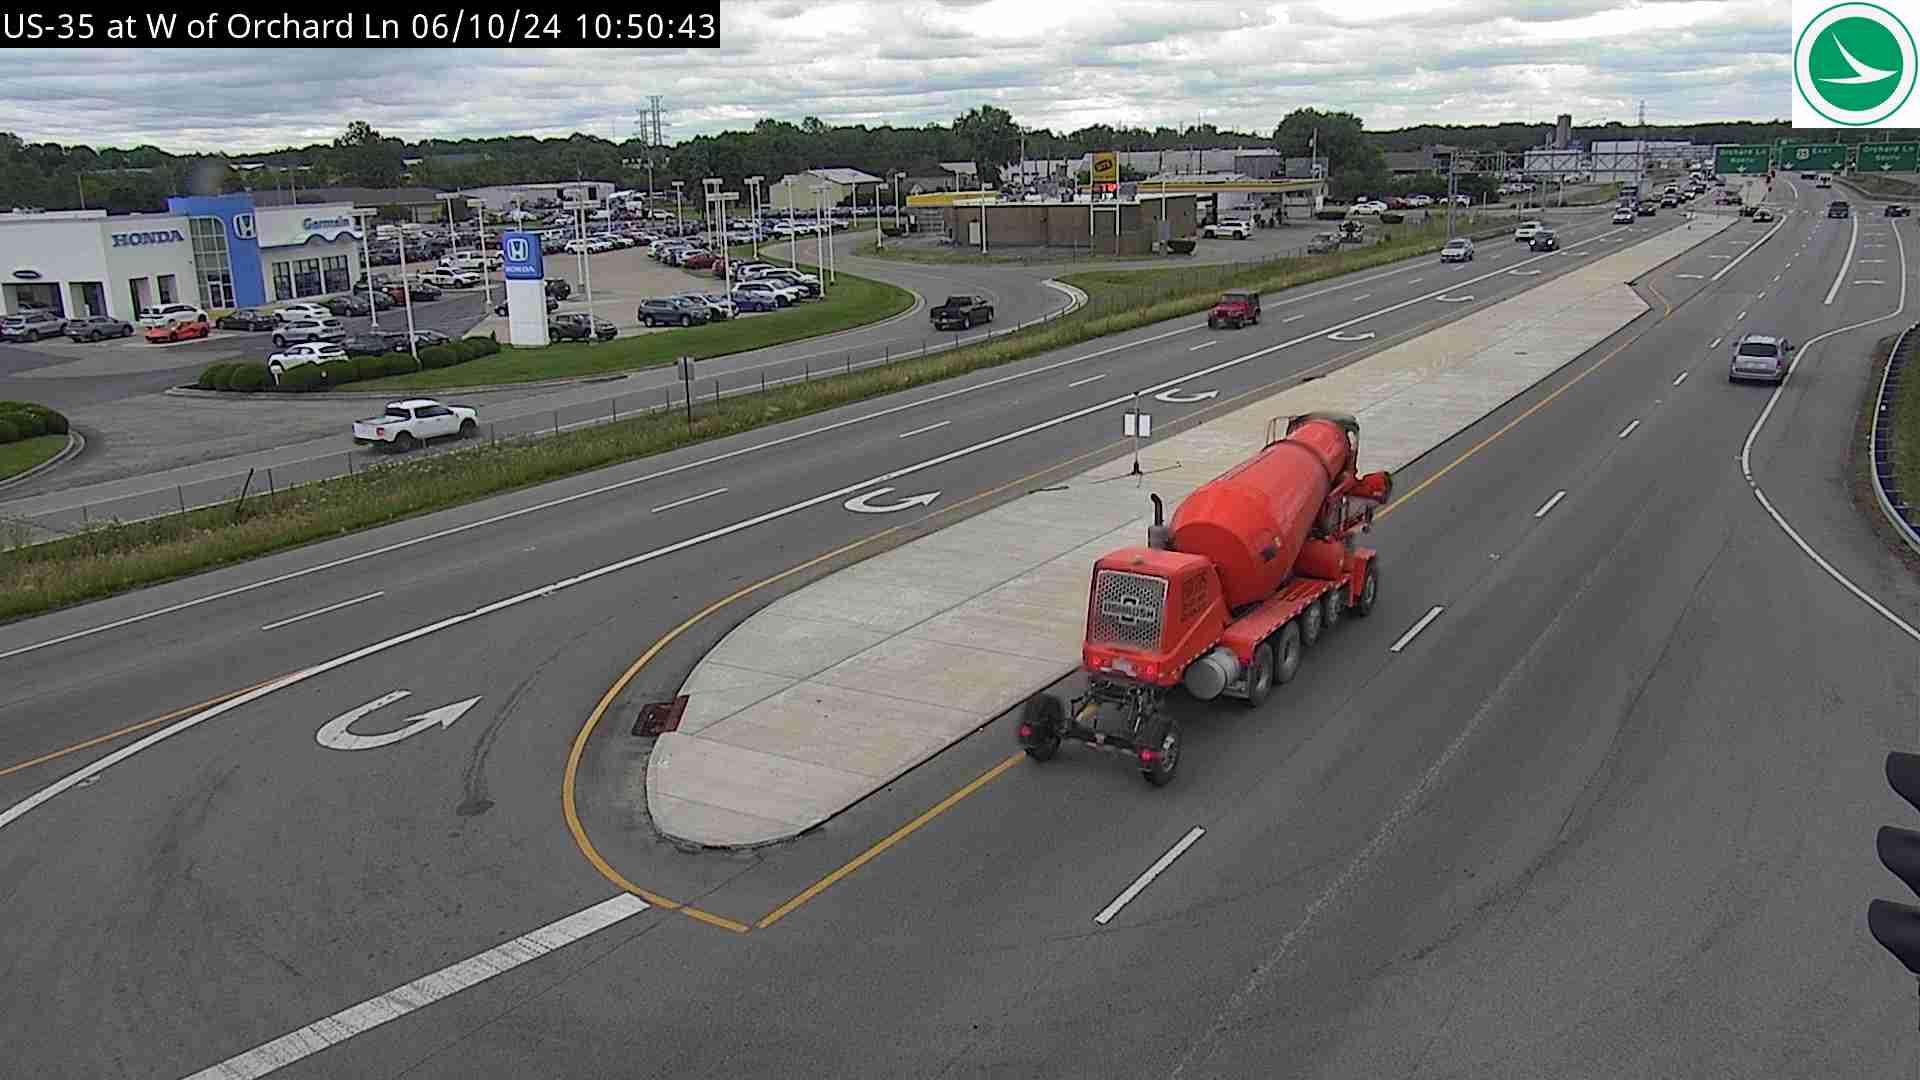 Traffic Cam Alpha: US-35 at West of Orchard Ln